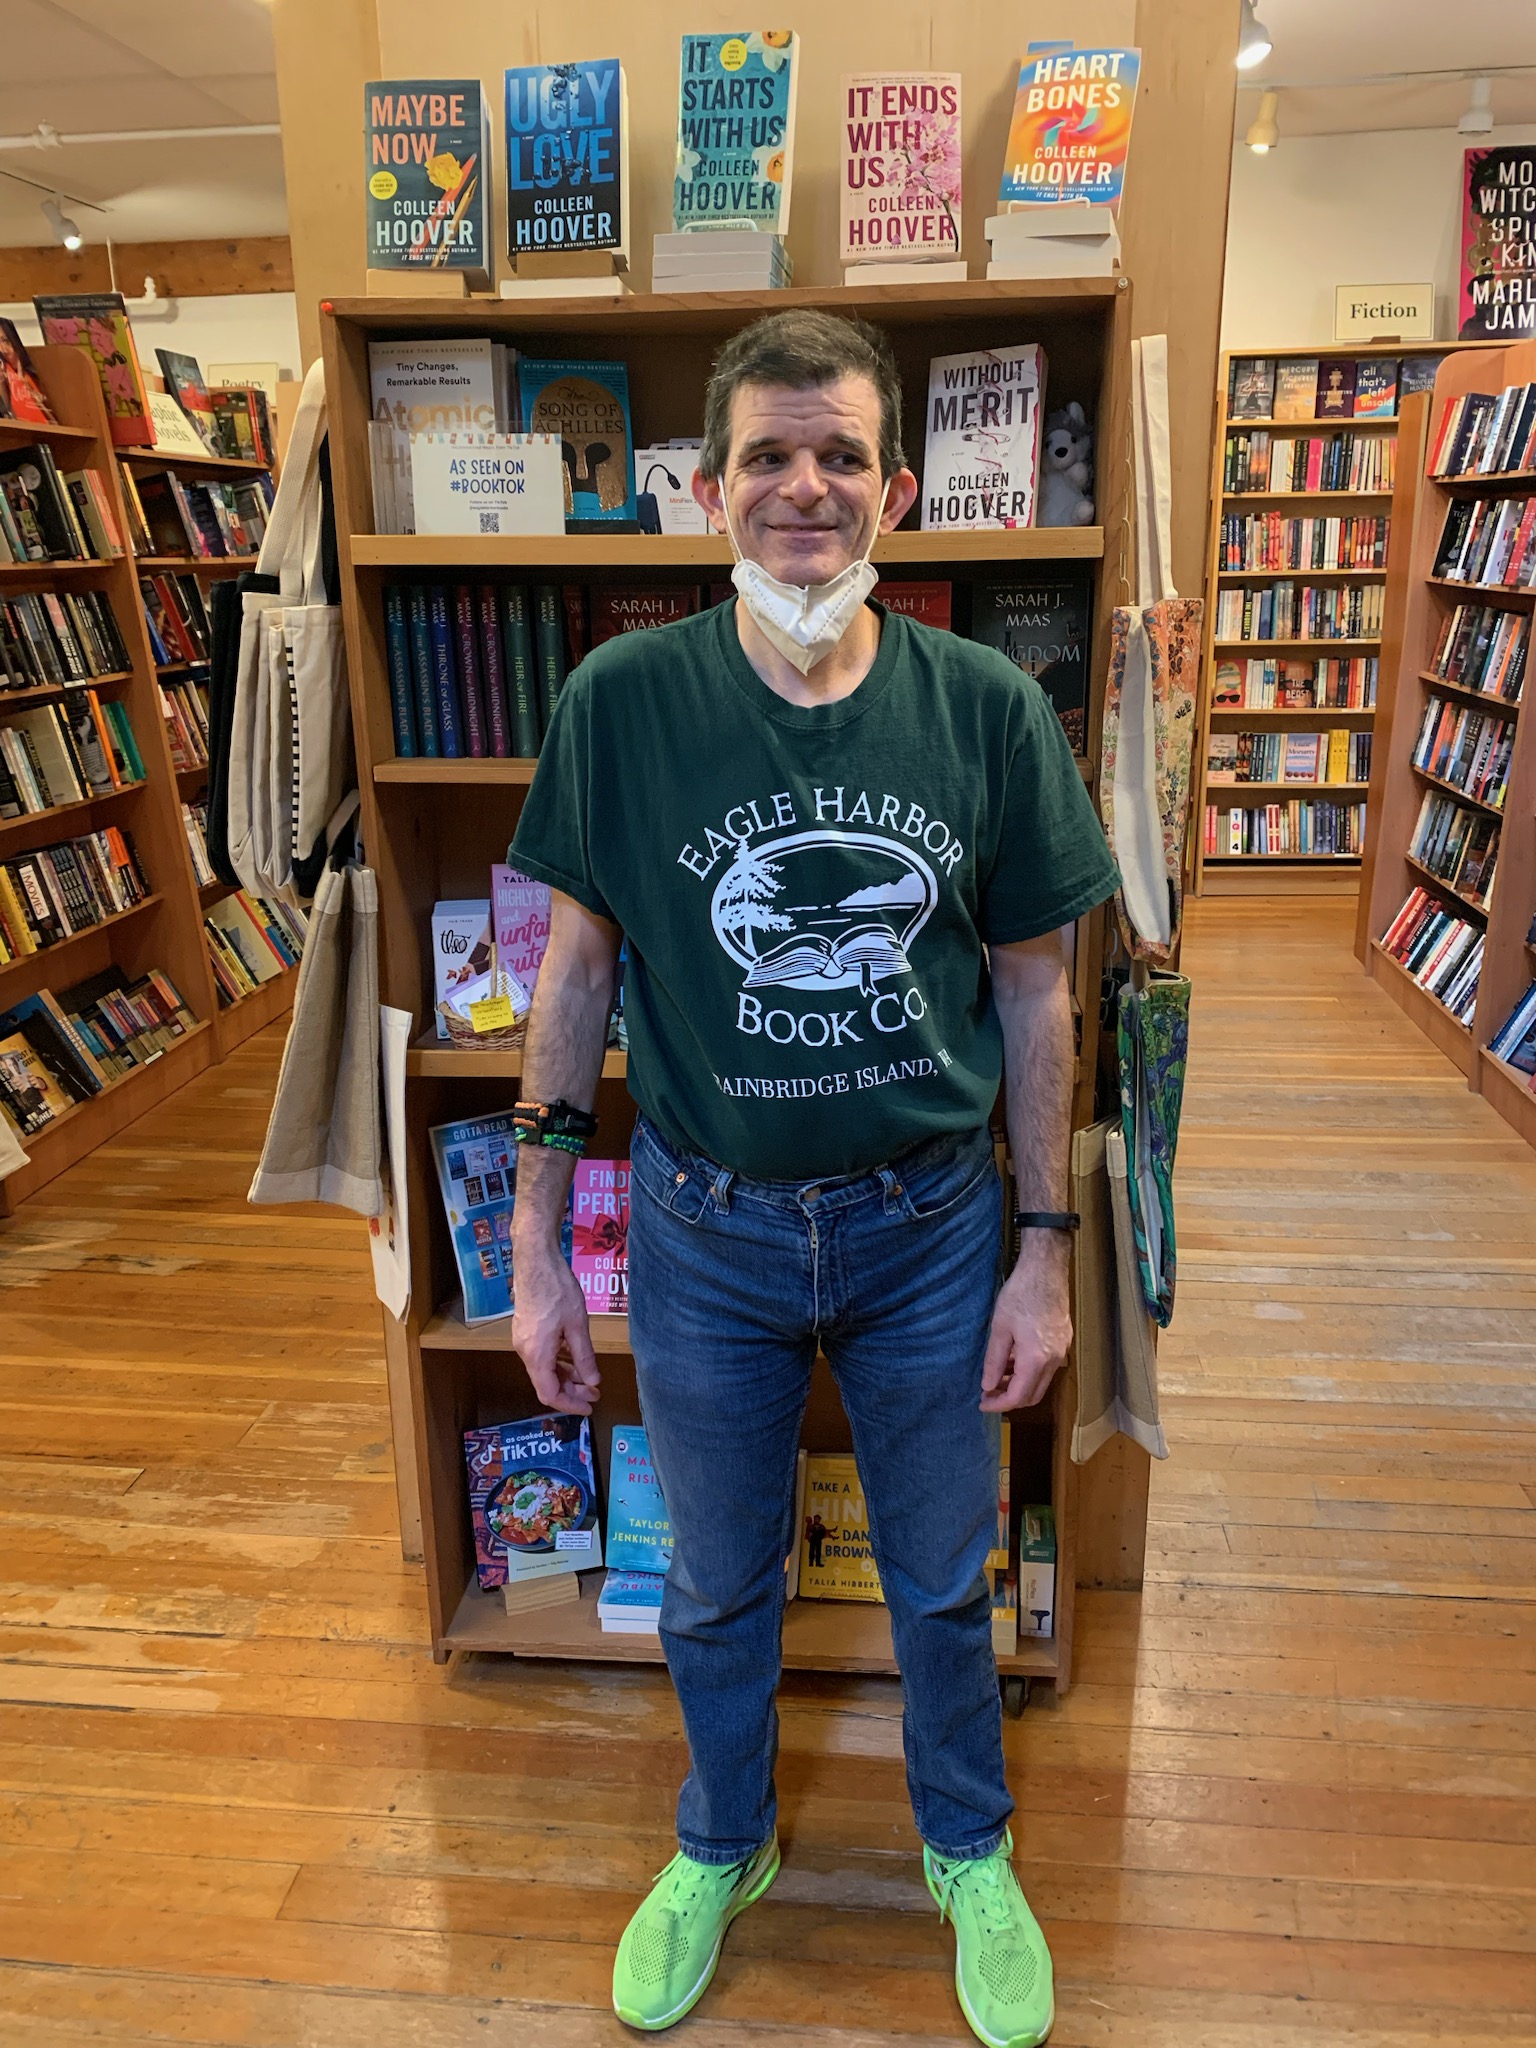 Image: Photo of Mike McLane stands in front of a book display at his job at Eagle Harbor Book Company.